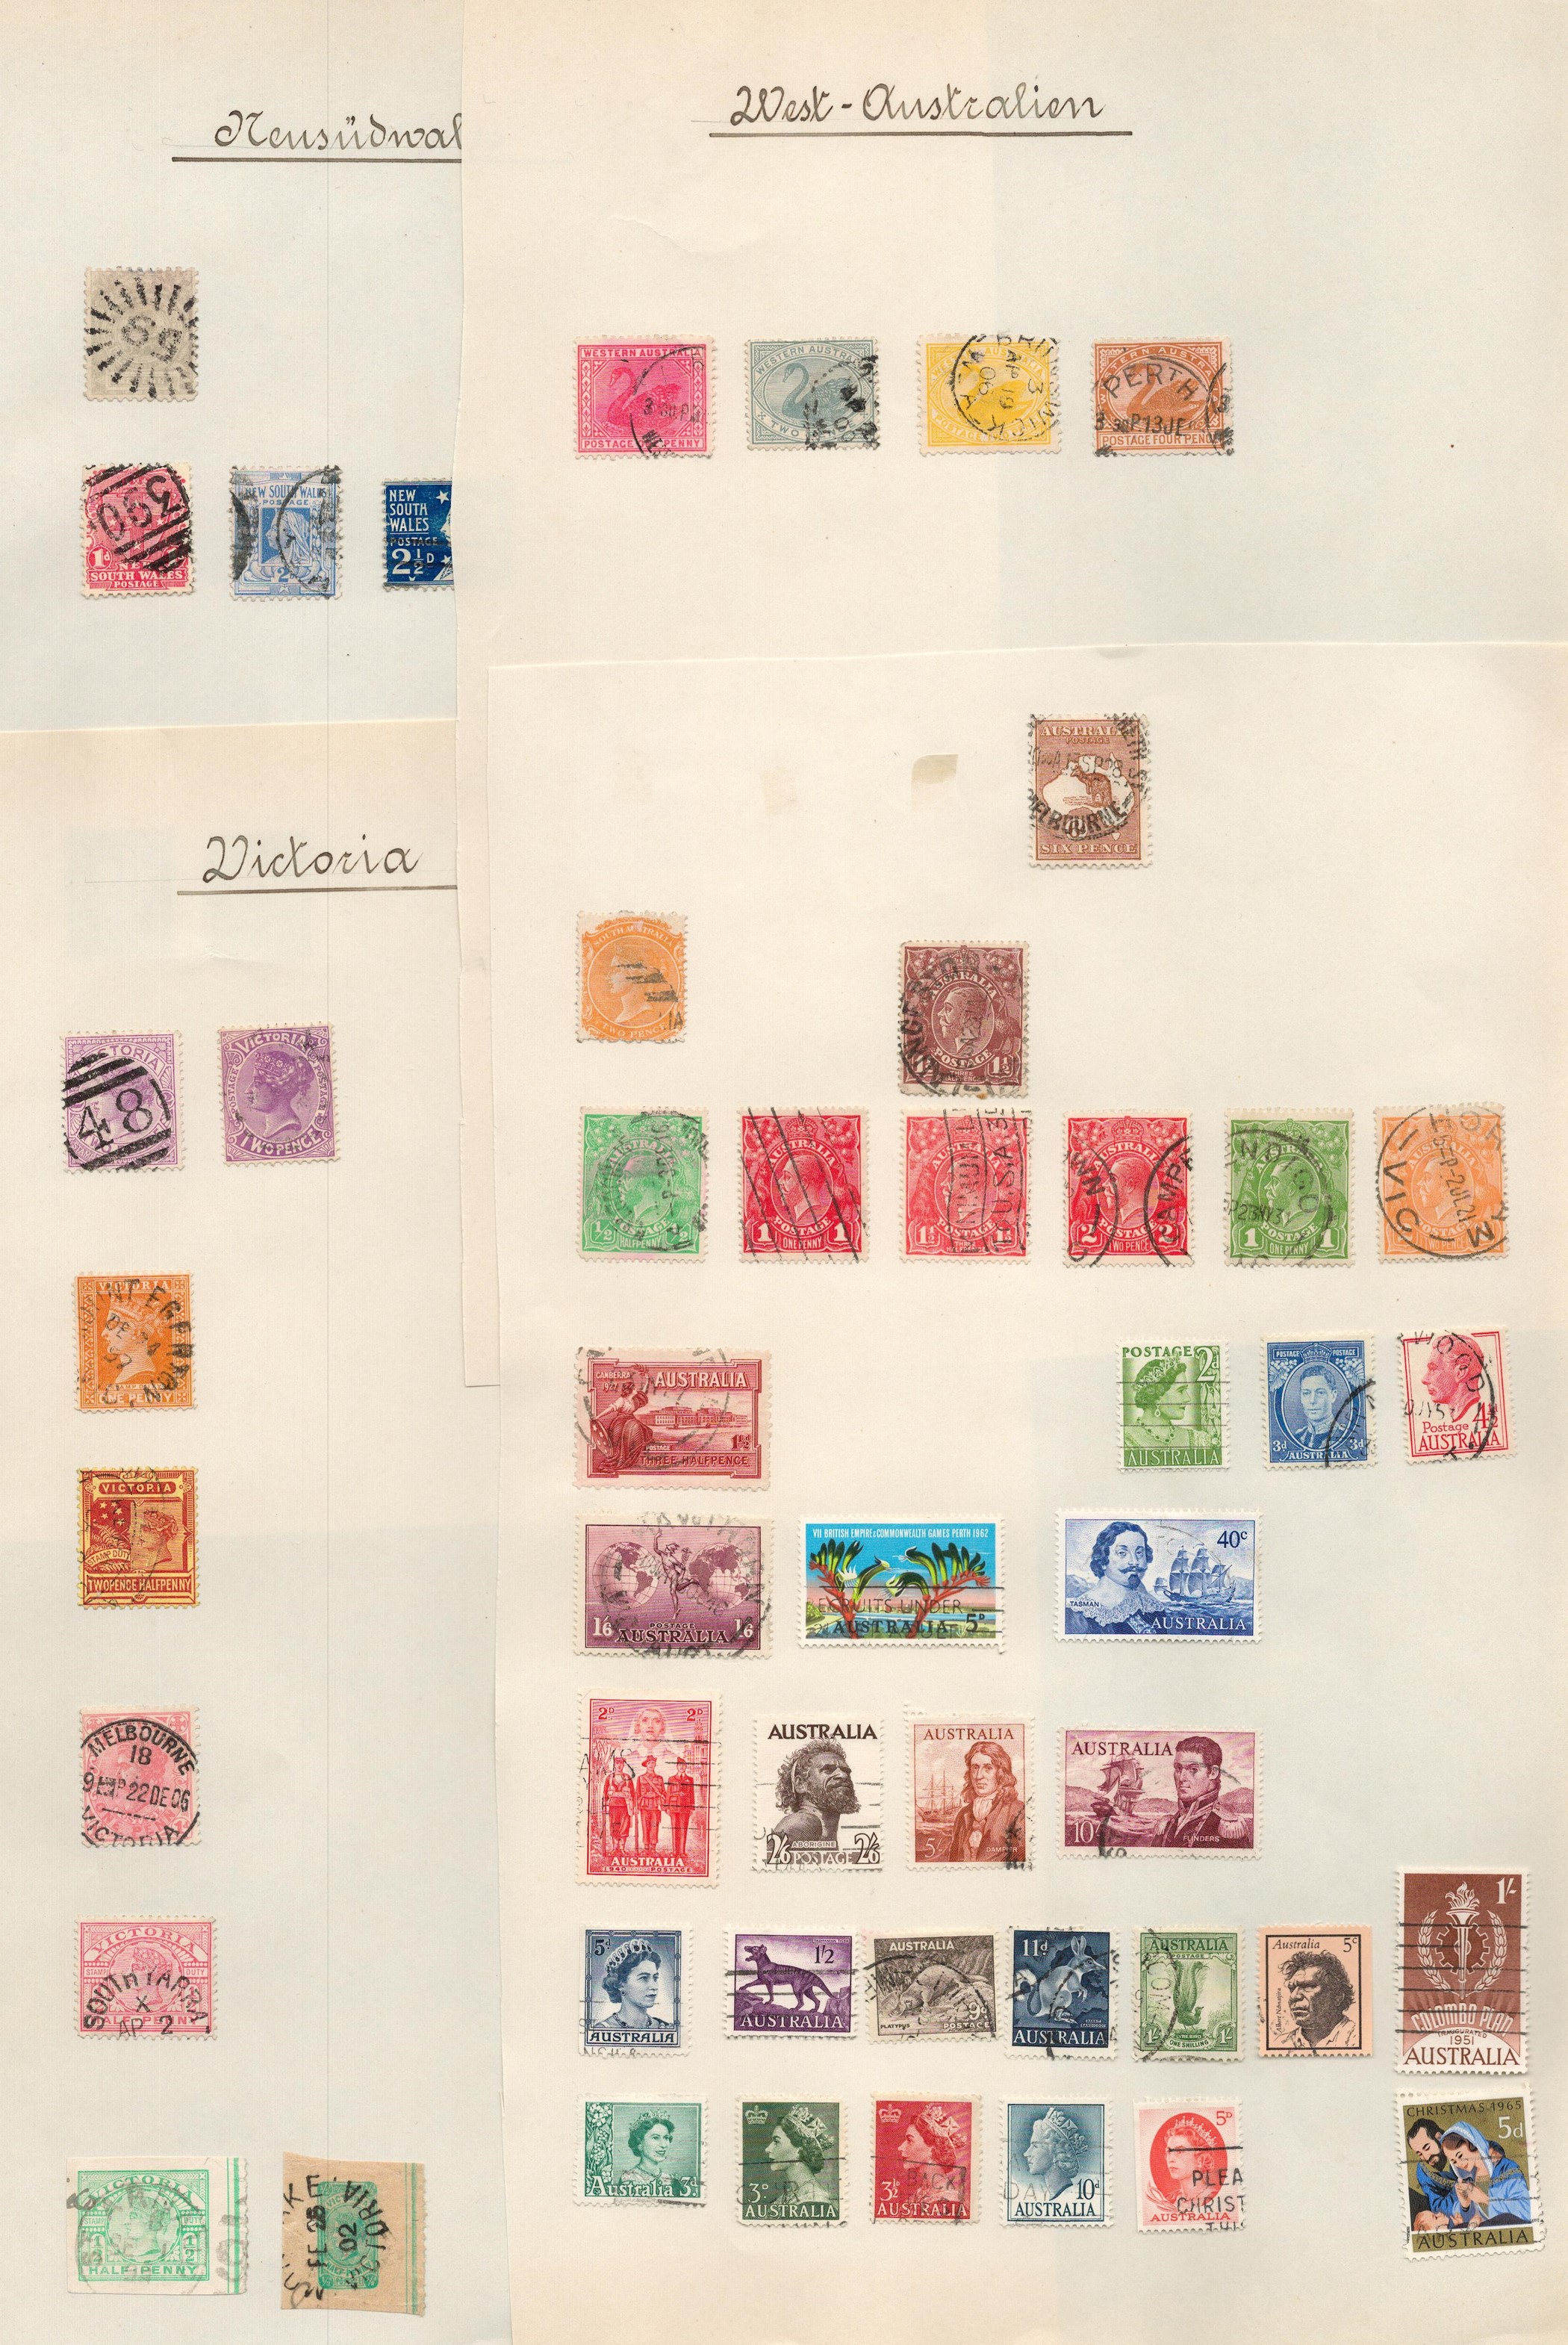 BCW stamp collection over 8 loose album pages. Includes Australia, NSW, Queensland, Tasmania, - Image 2 of 2